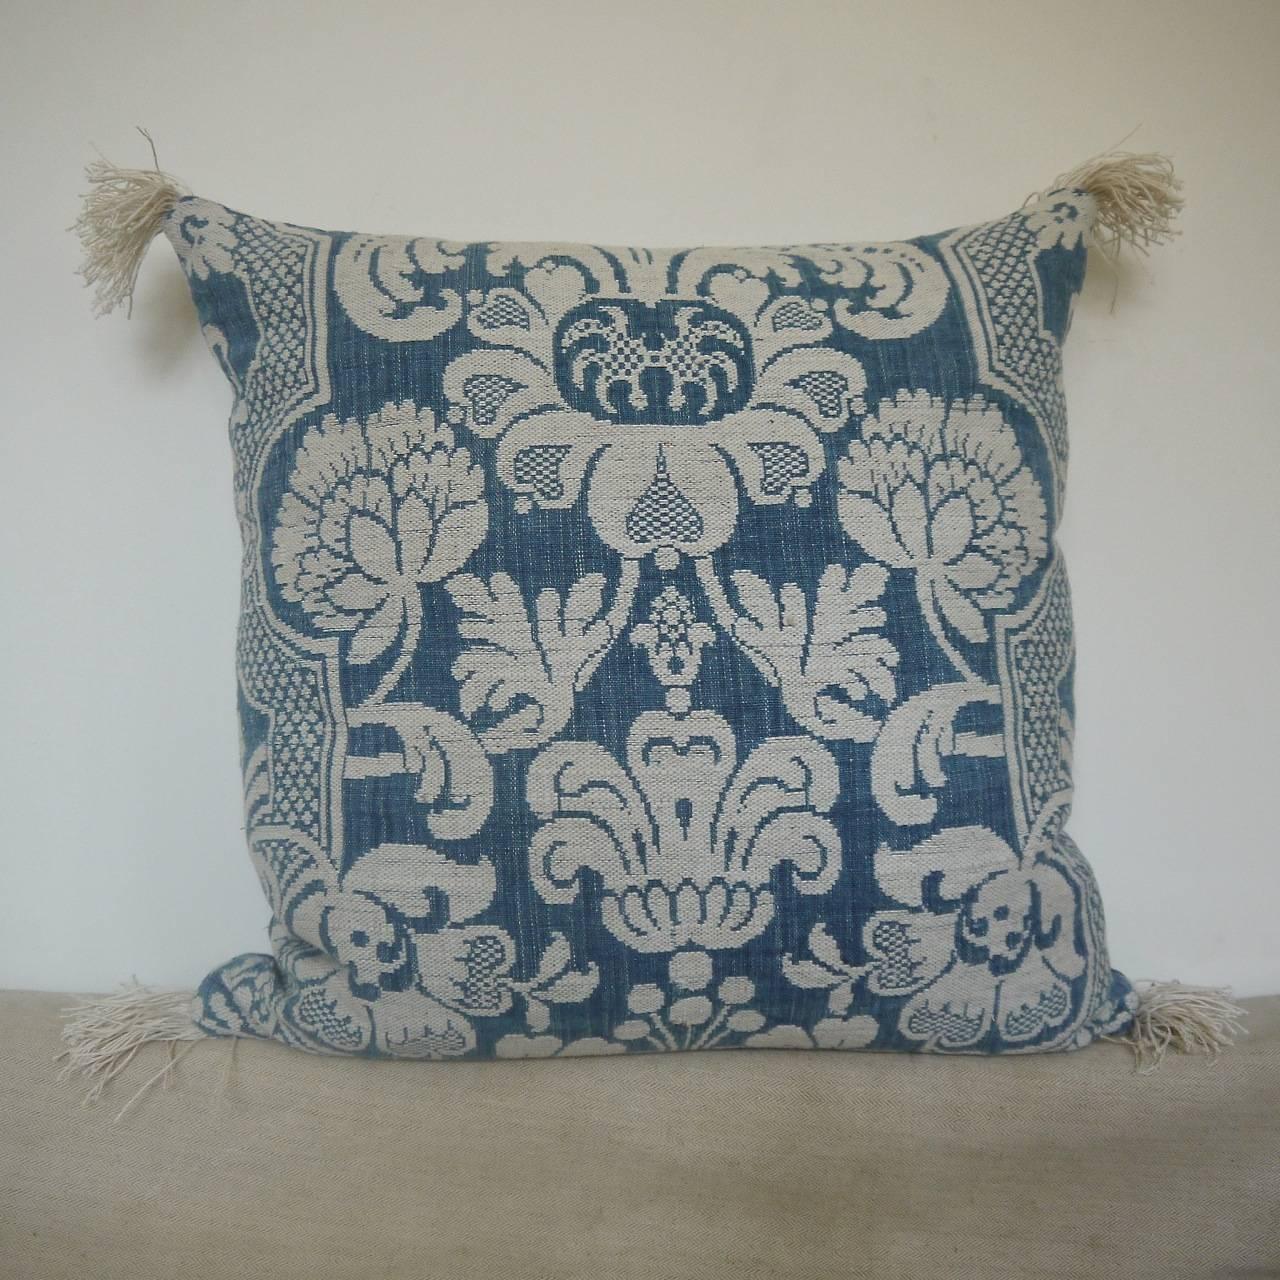 French circa 1760s woven linen and cotton cushion. Wonderful texture and contrast of weaves and yarns. With antique French linen fringing at the corners and backed in a dyed French 19th century linen. Slipstitched closed with a duck feather insert.